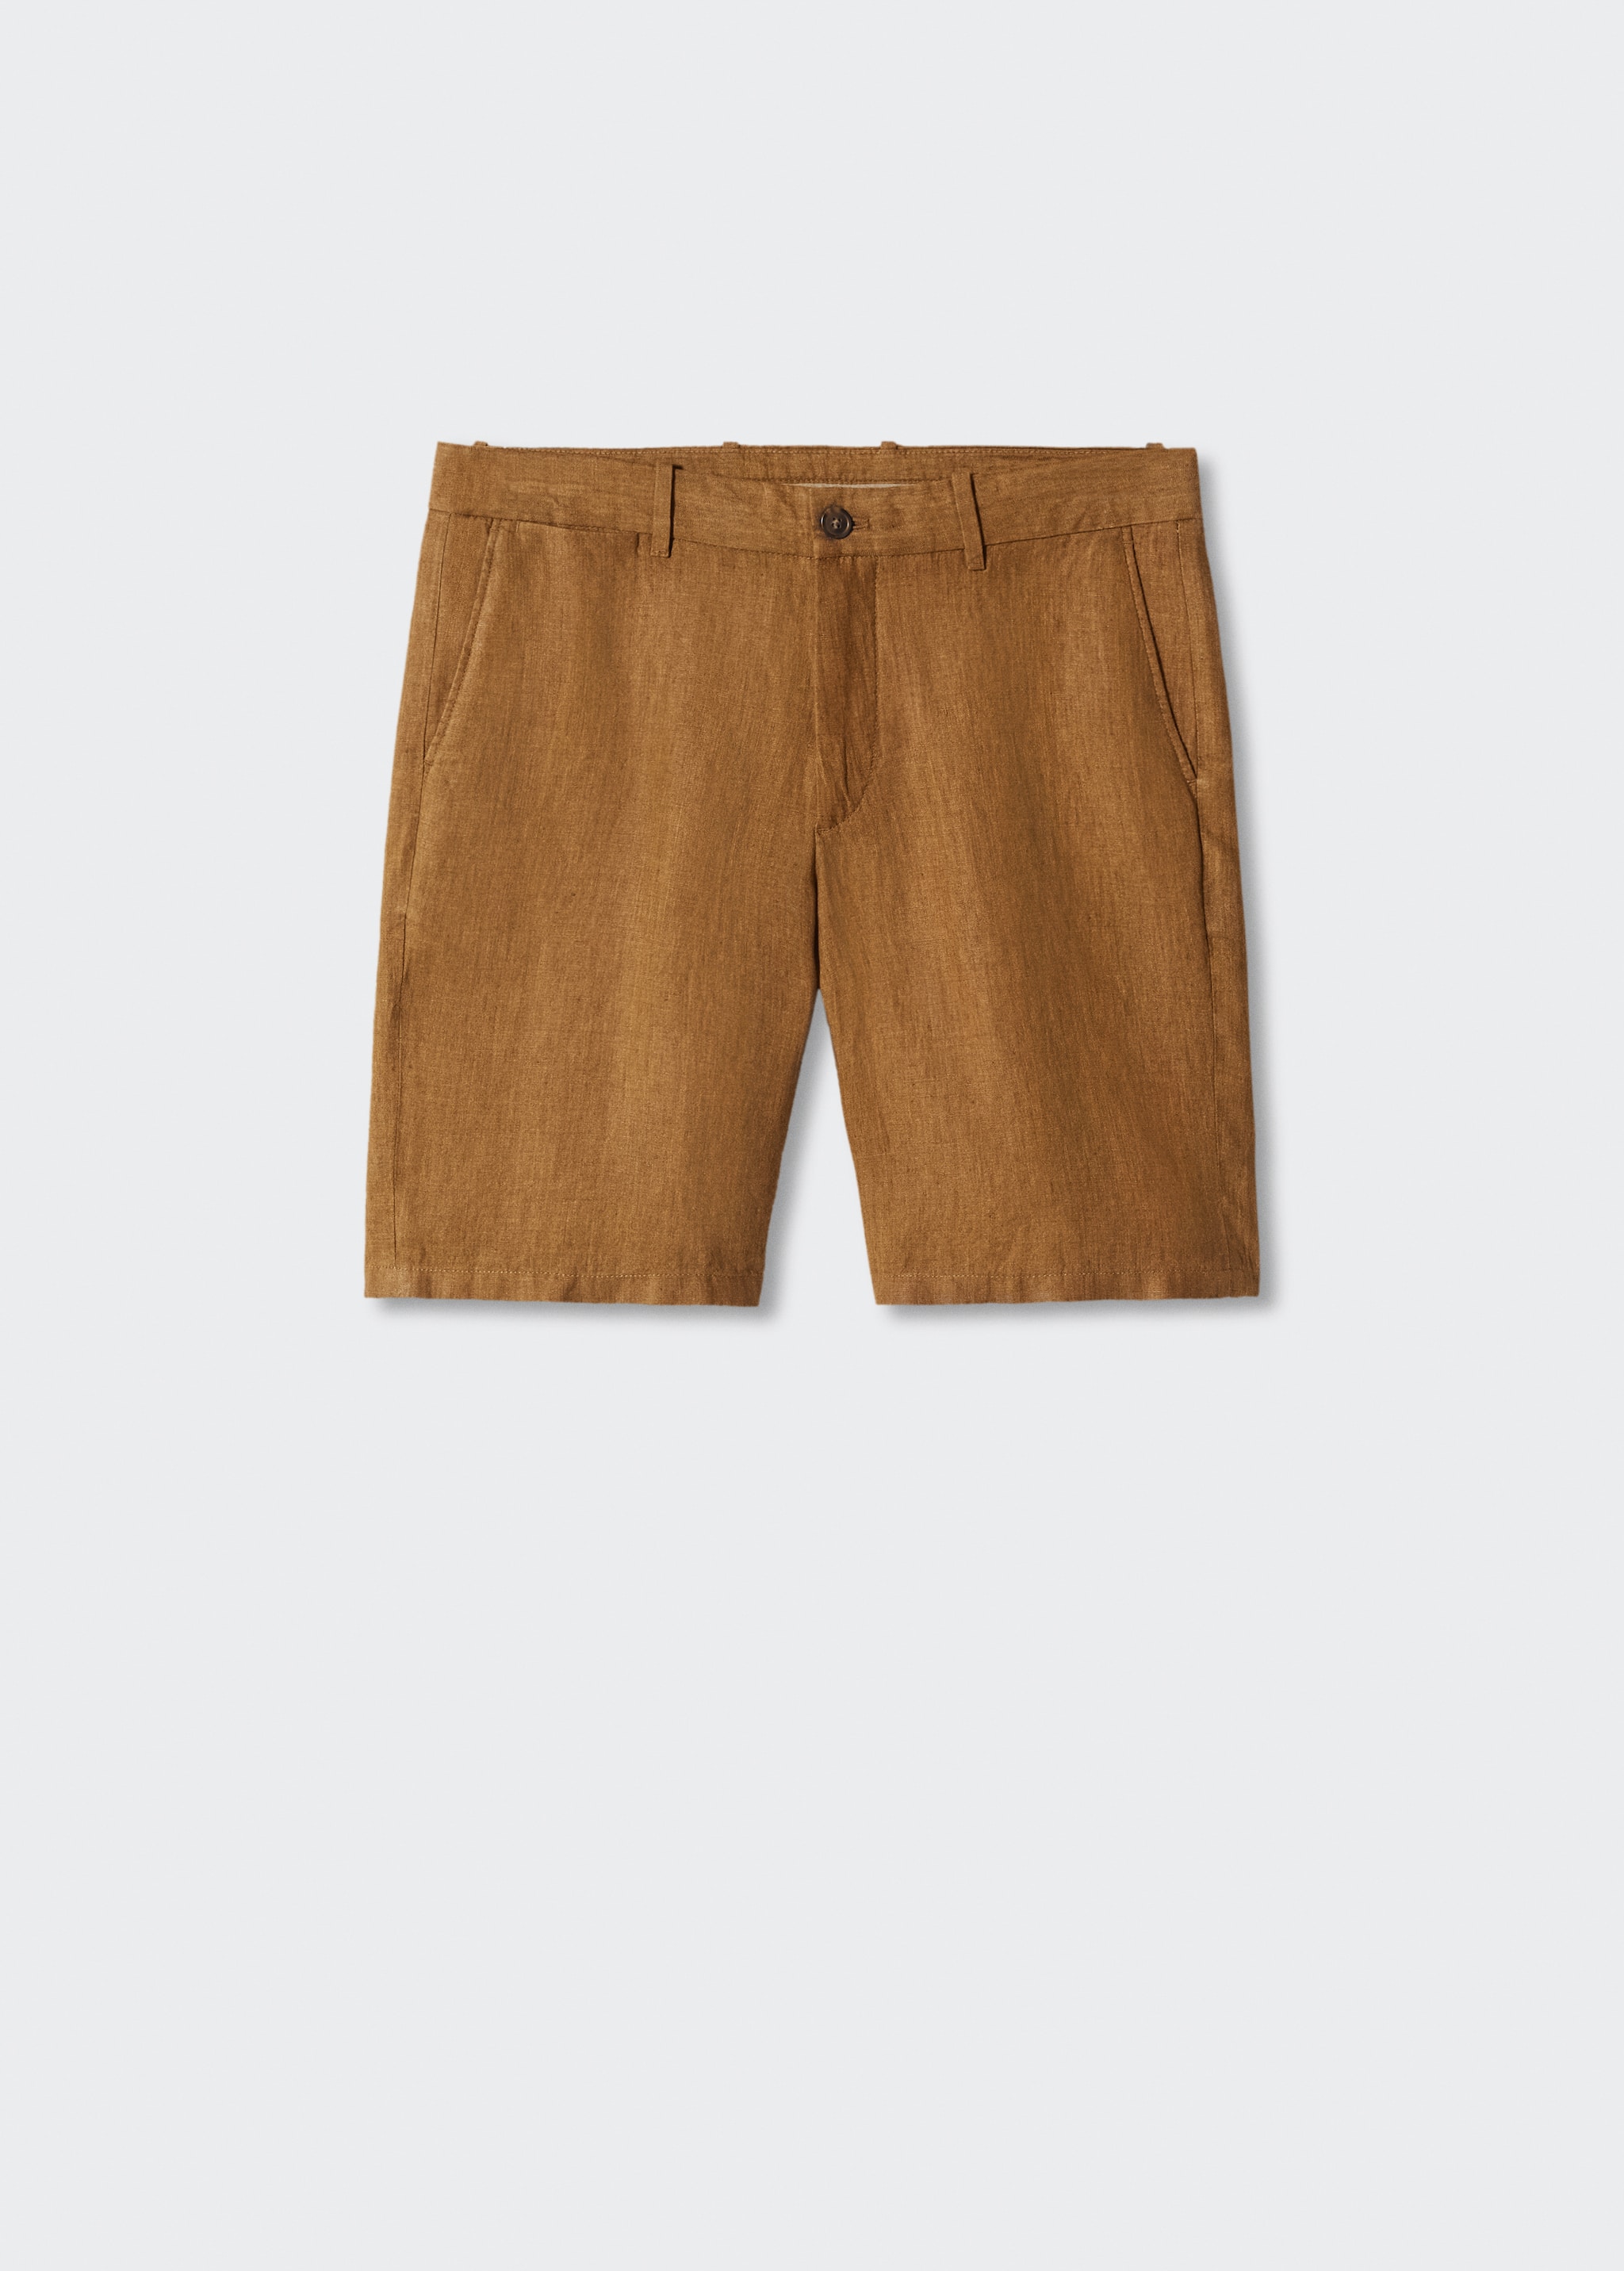 100% linen bermuda shorts - Article without model